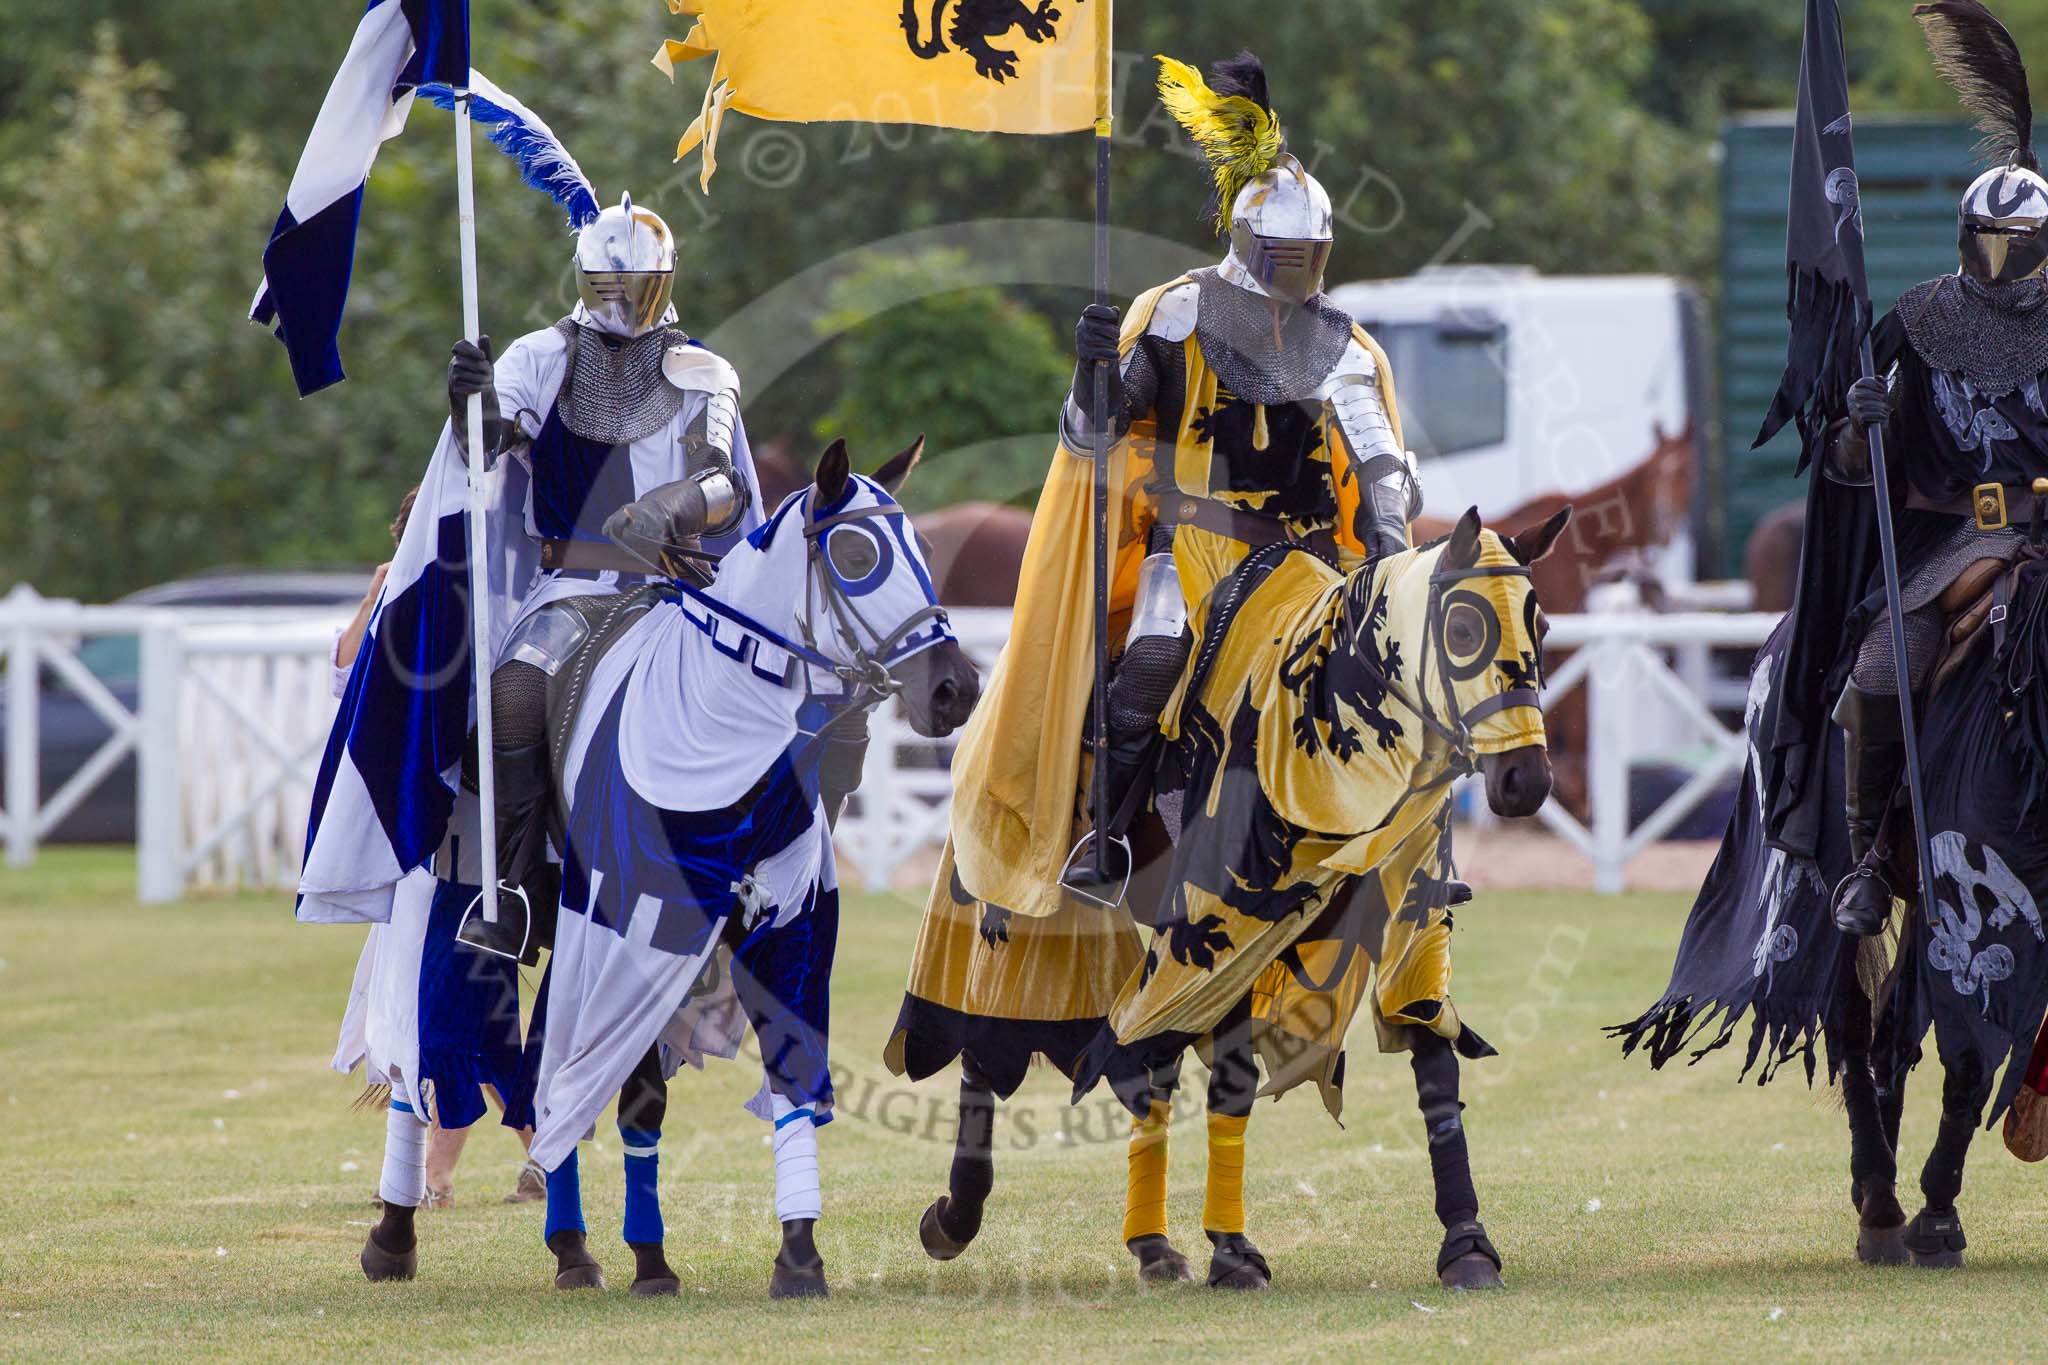 DBPC Polo in the Park 2013 - jousting display by the Knights of Middle England.
Dallas Burston Polo Club, ,
Southam,
Warwickshire,
United Kingdom,
on 01 September 2013 at 15:18, image #440